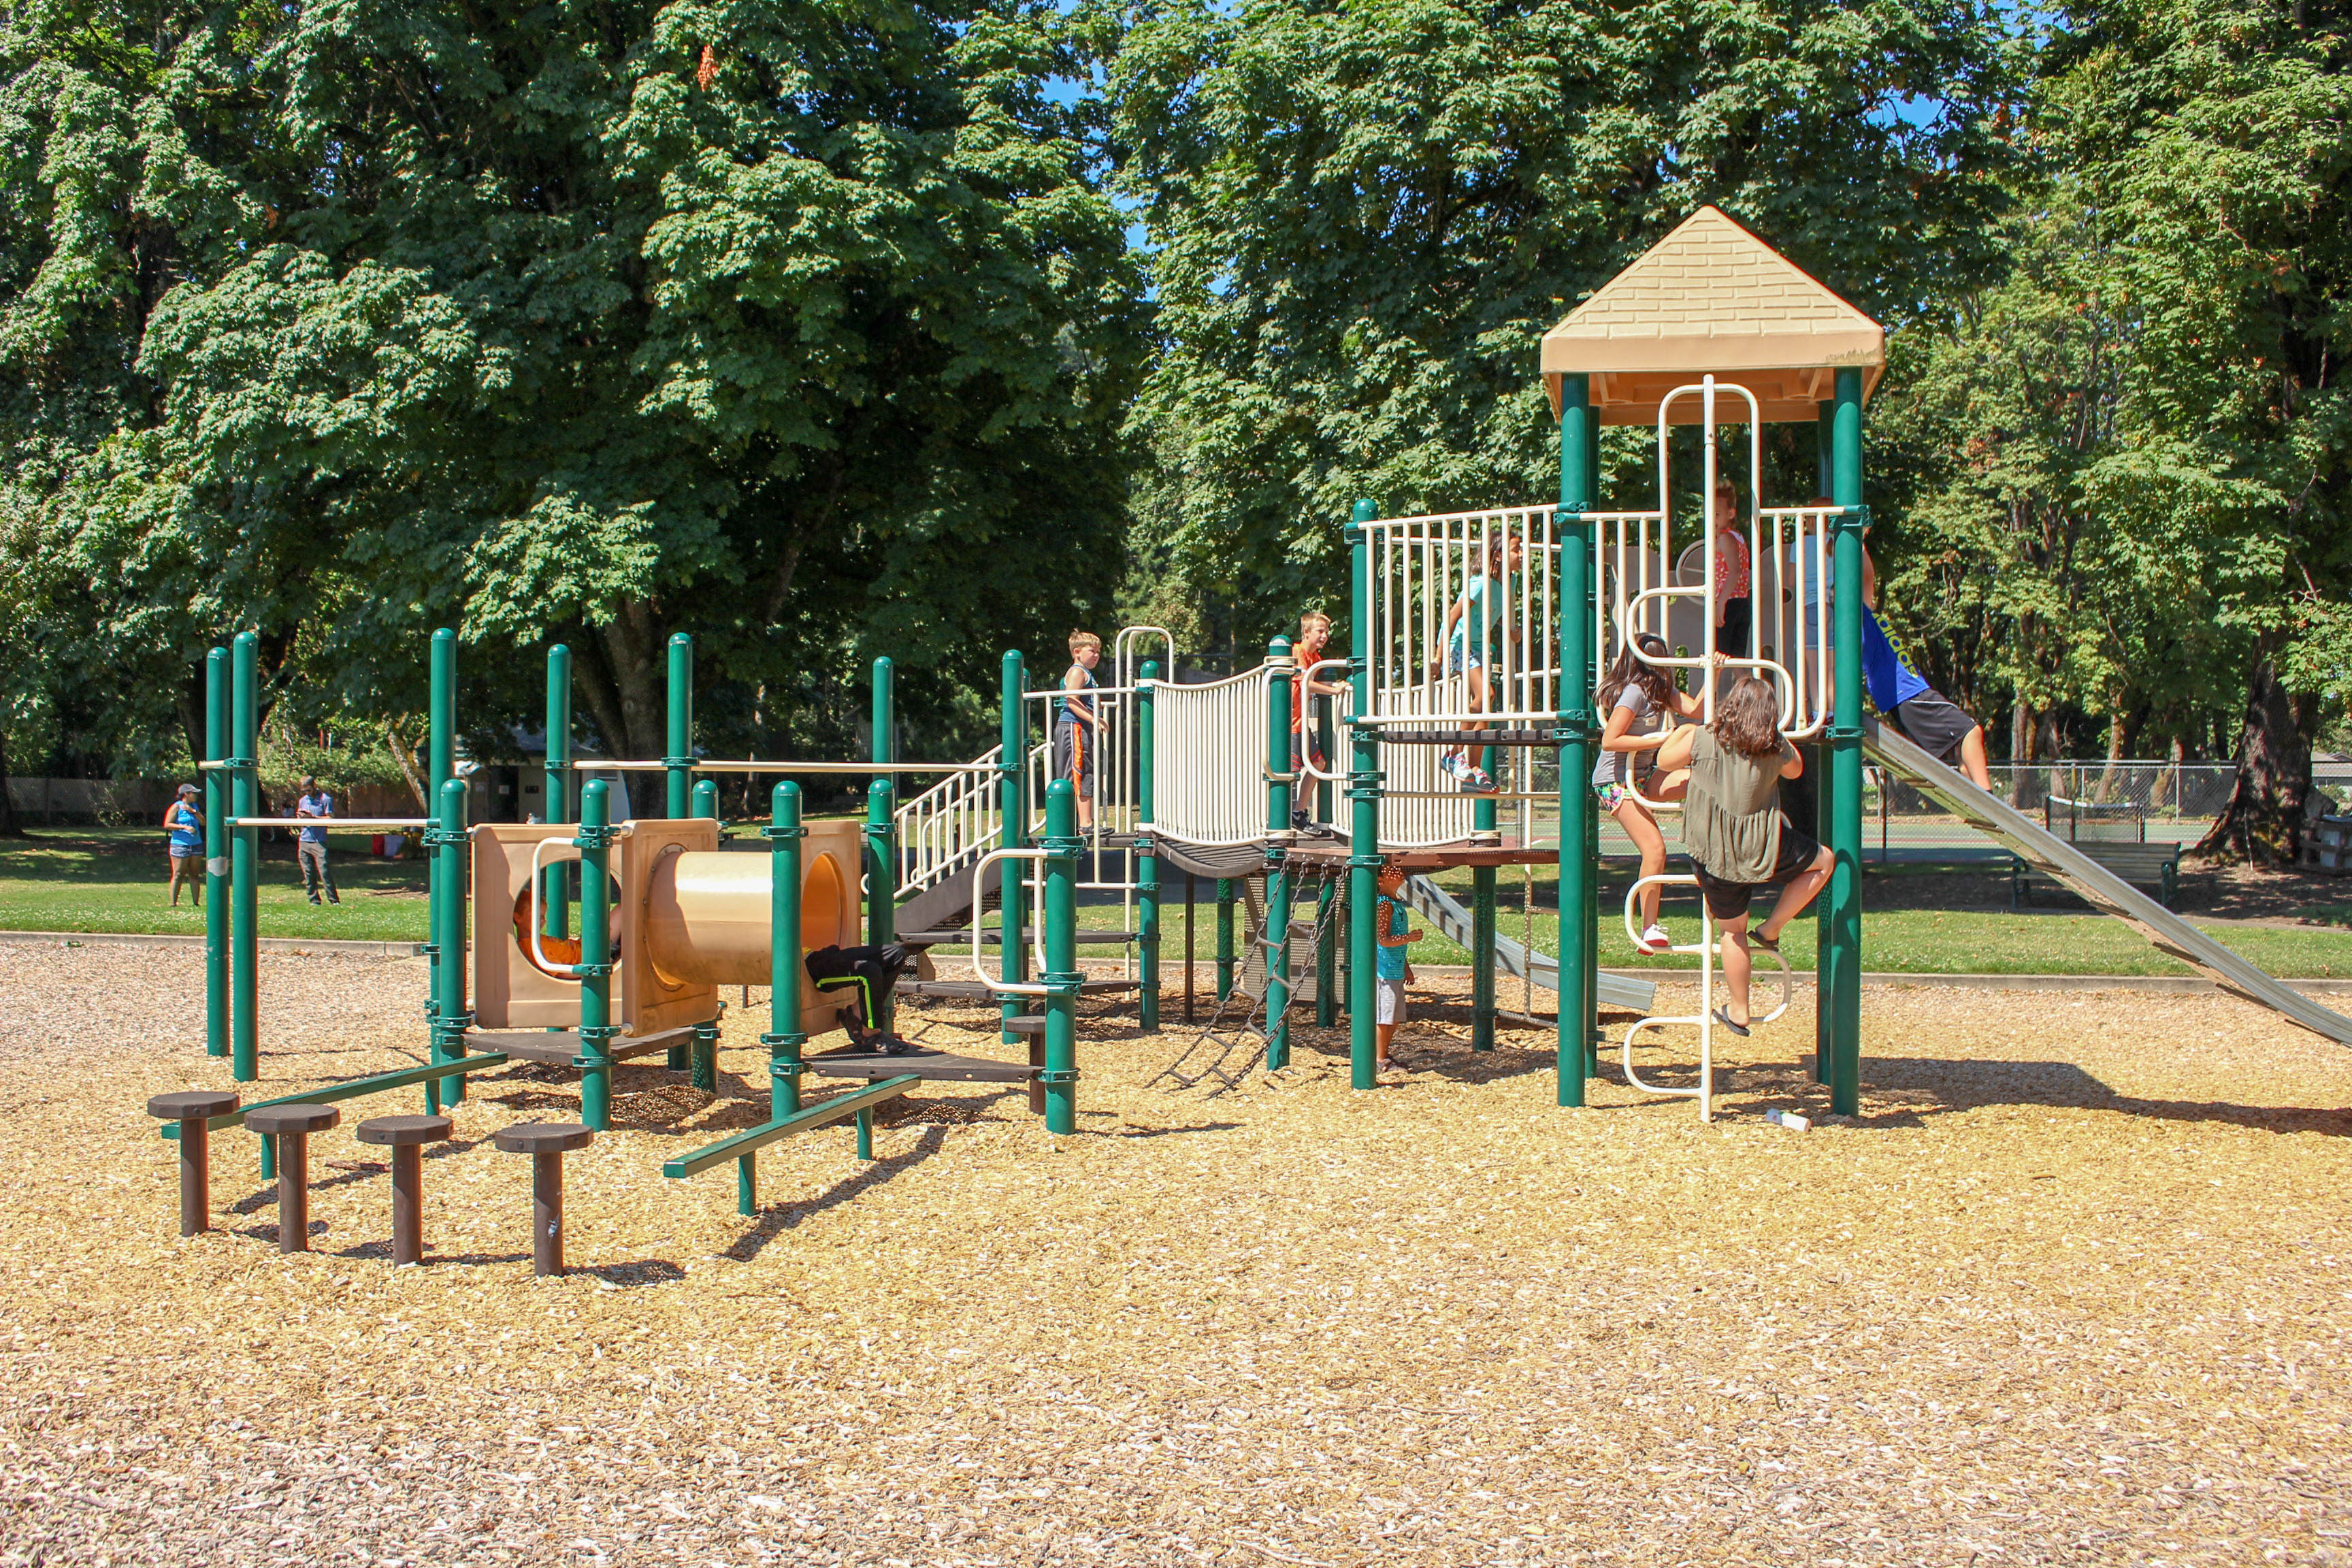 Medium sized play structure with kids climbing